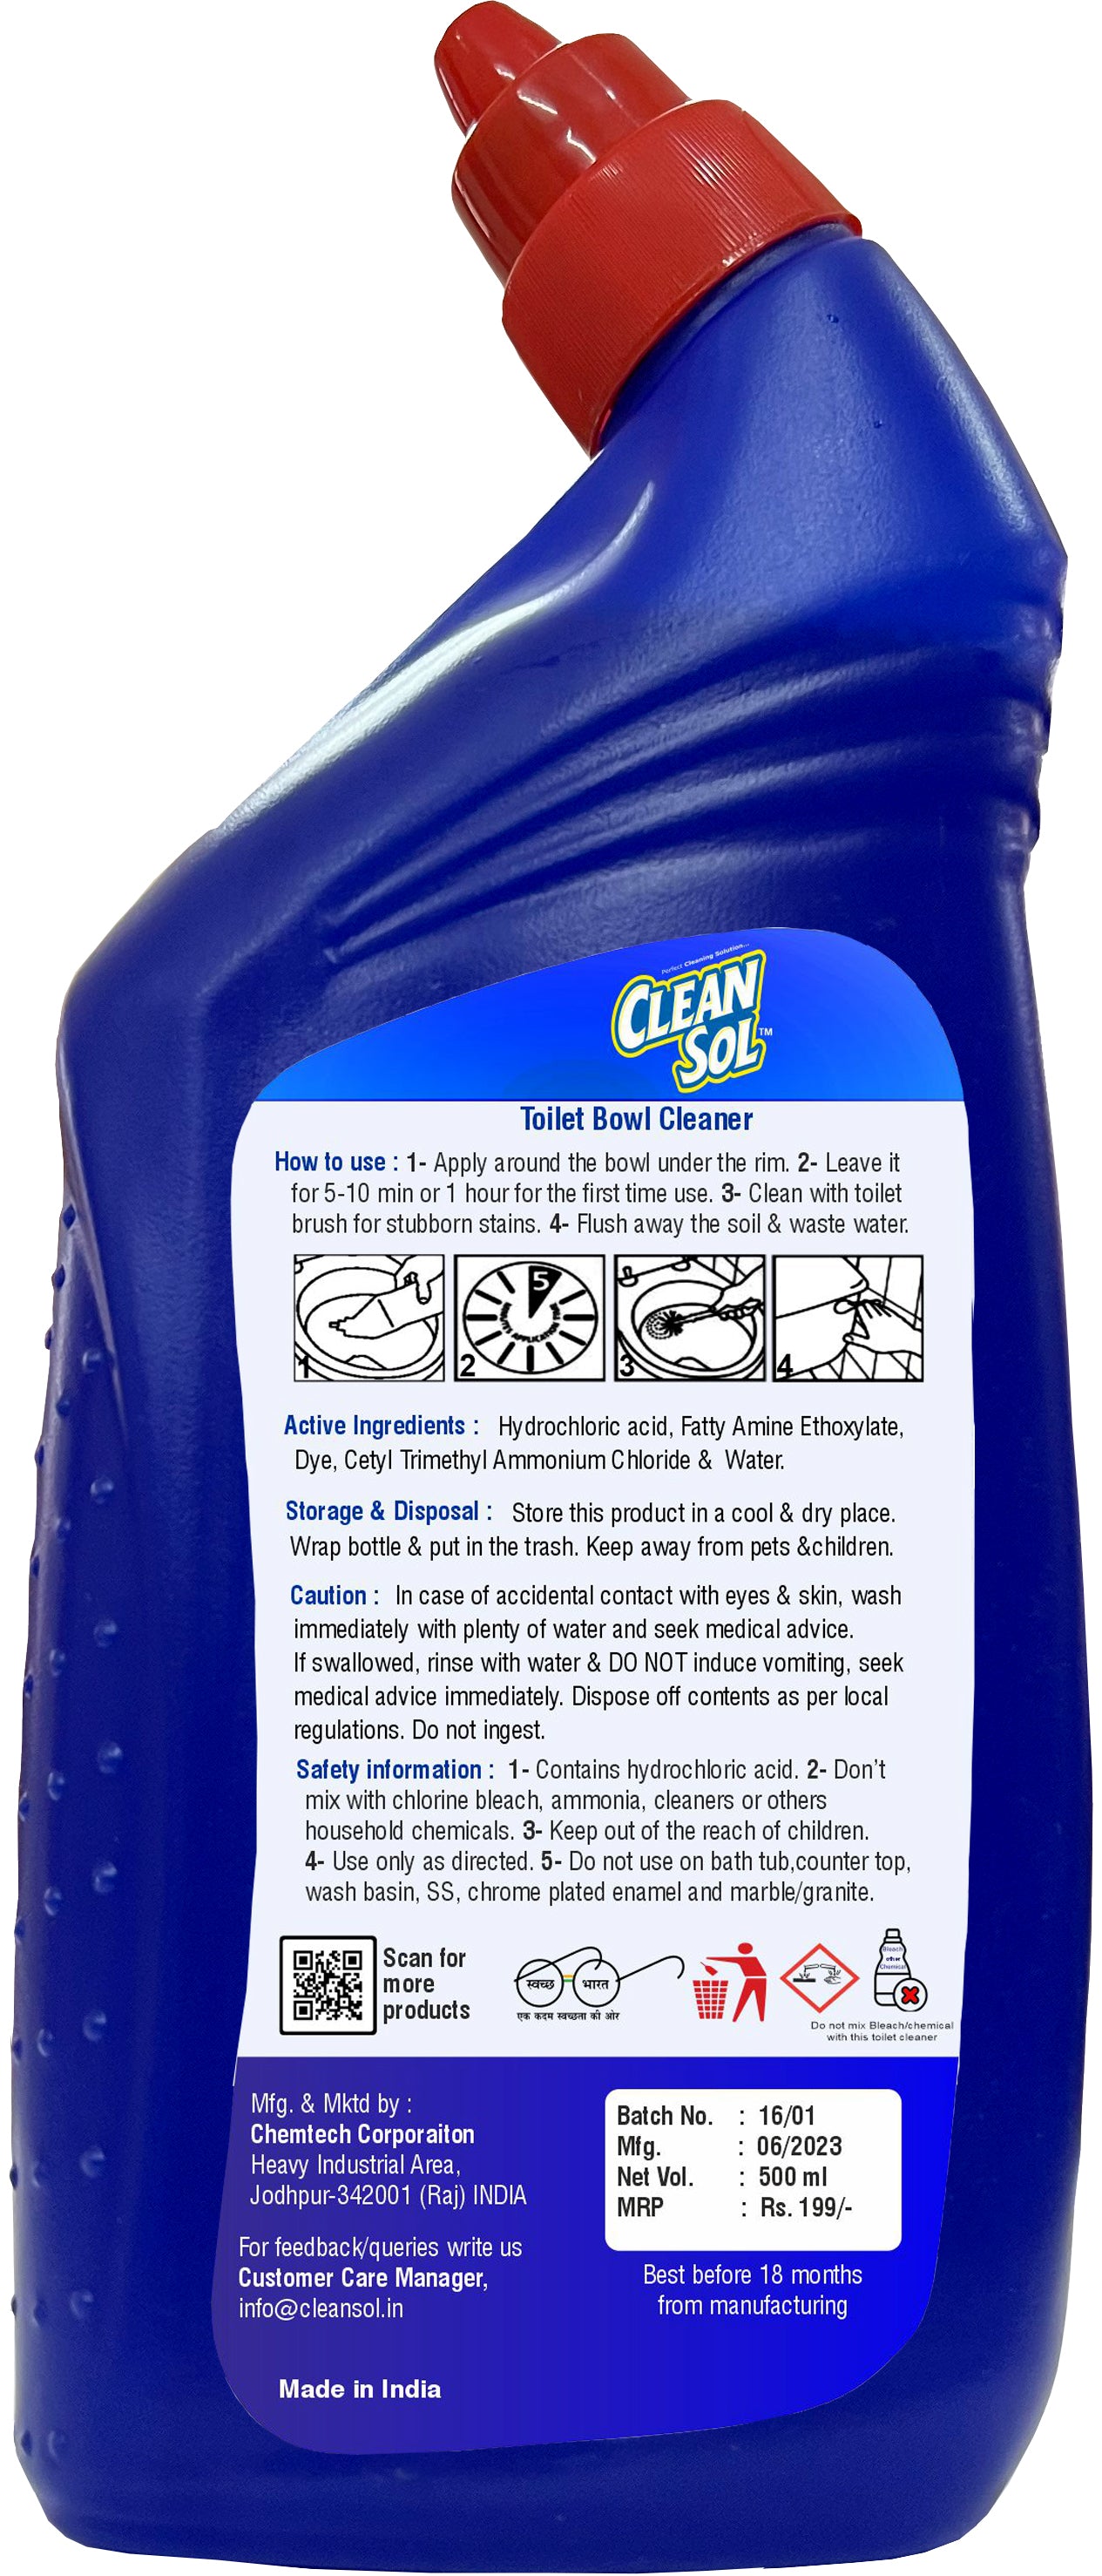 Cleansol Toilet Bowl Cleaner